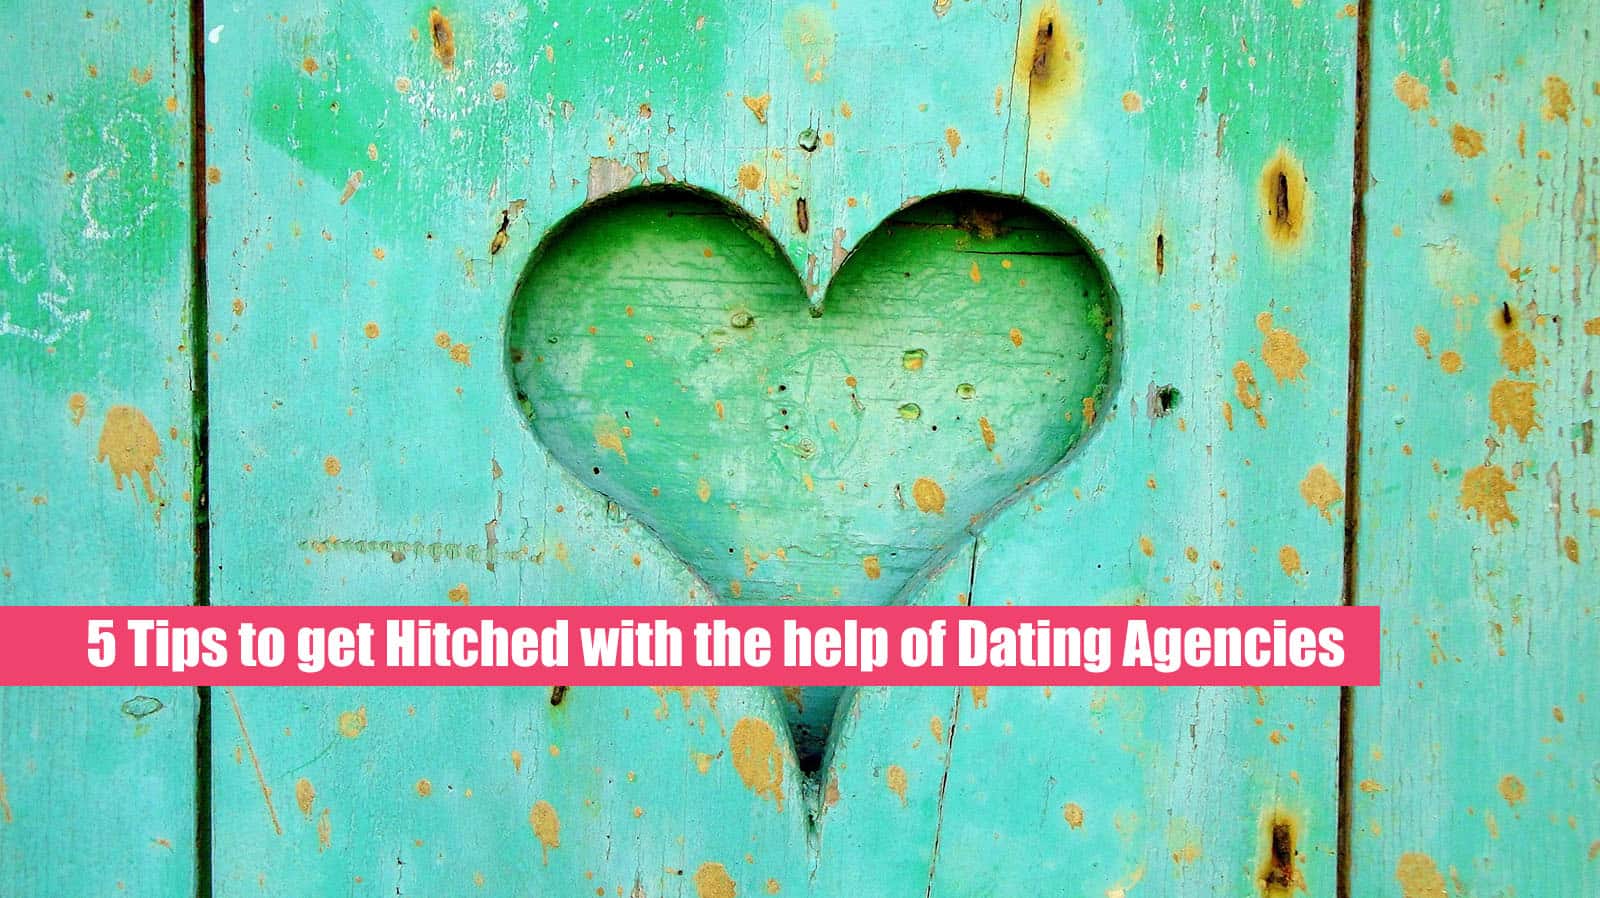 5 Tips to get Hitched with the help of Dating Agencies